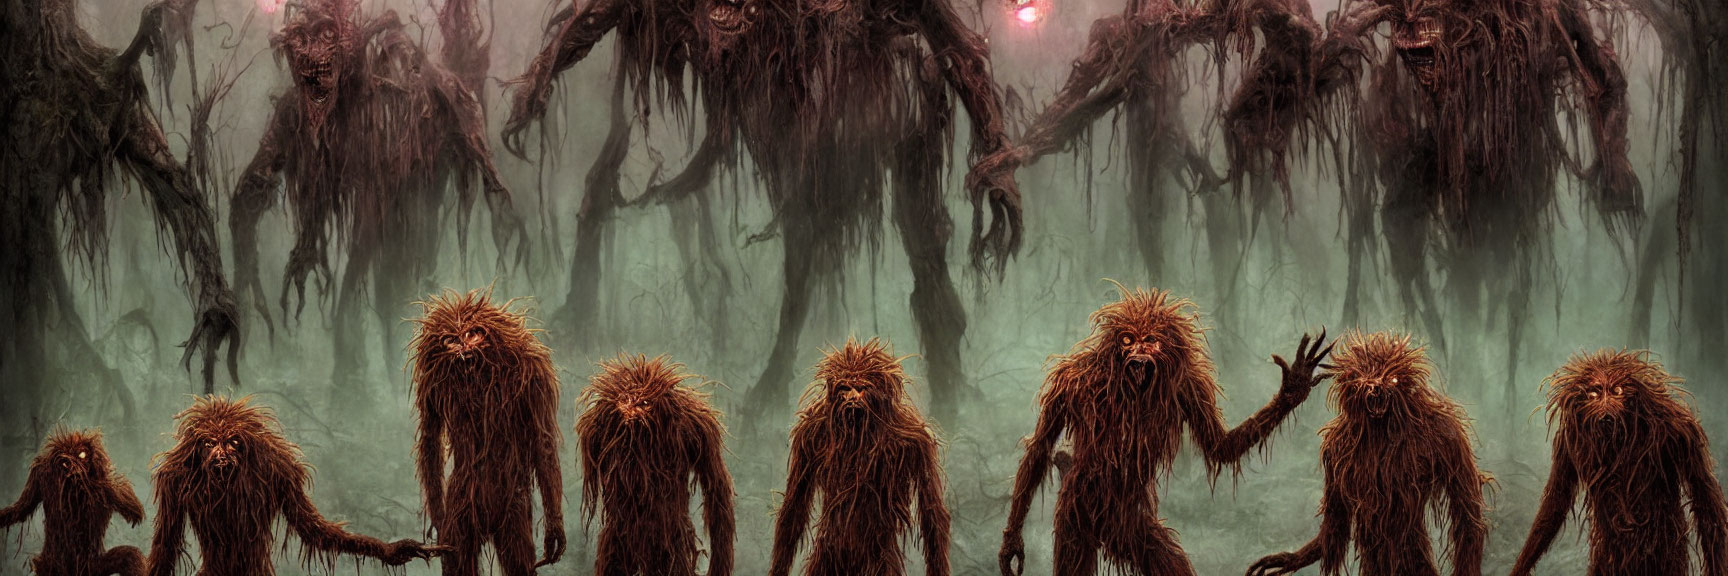 Shaggy monstrous creatures with glowing eyes in misty forest